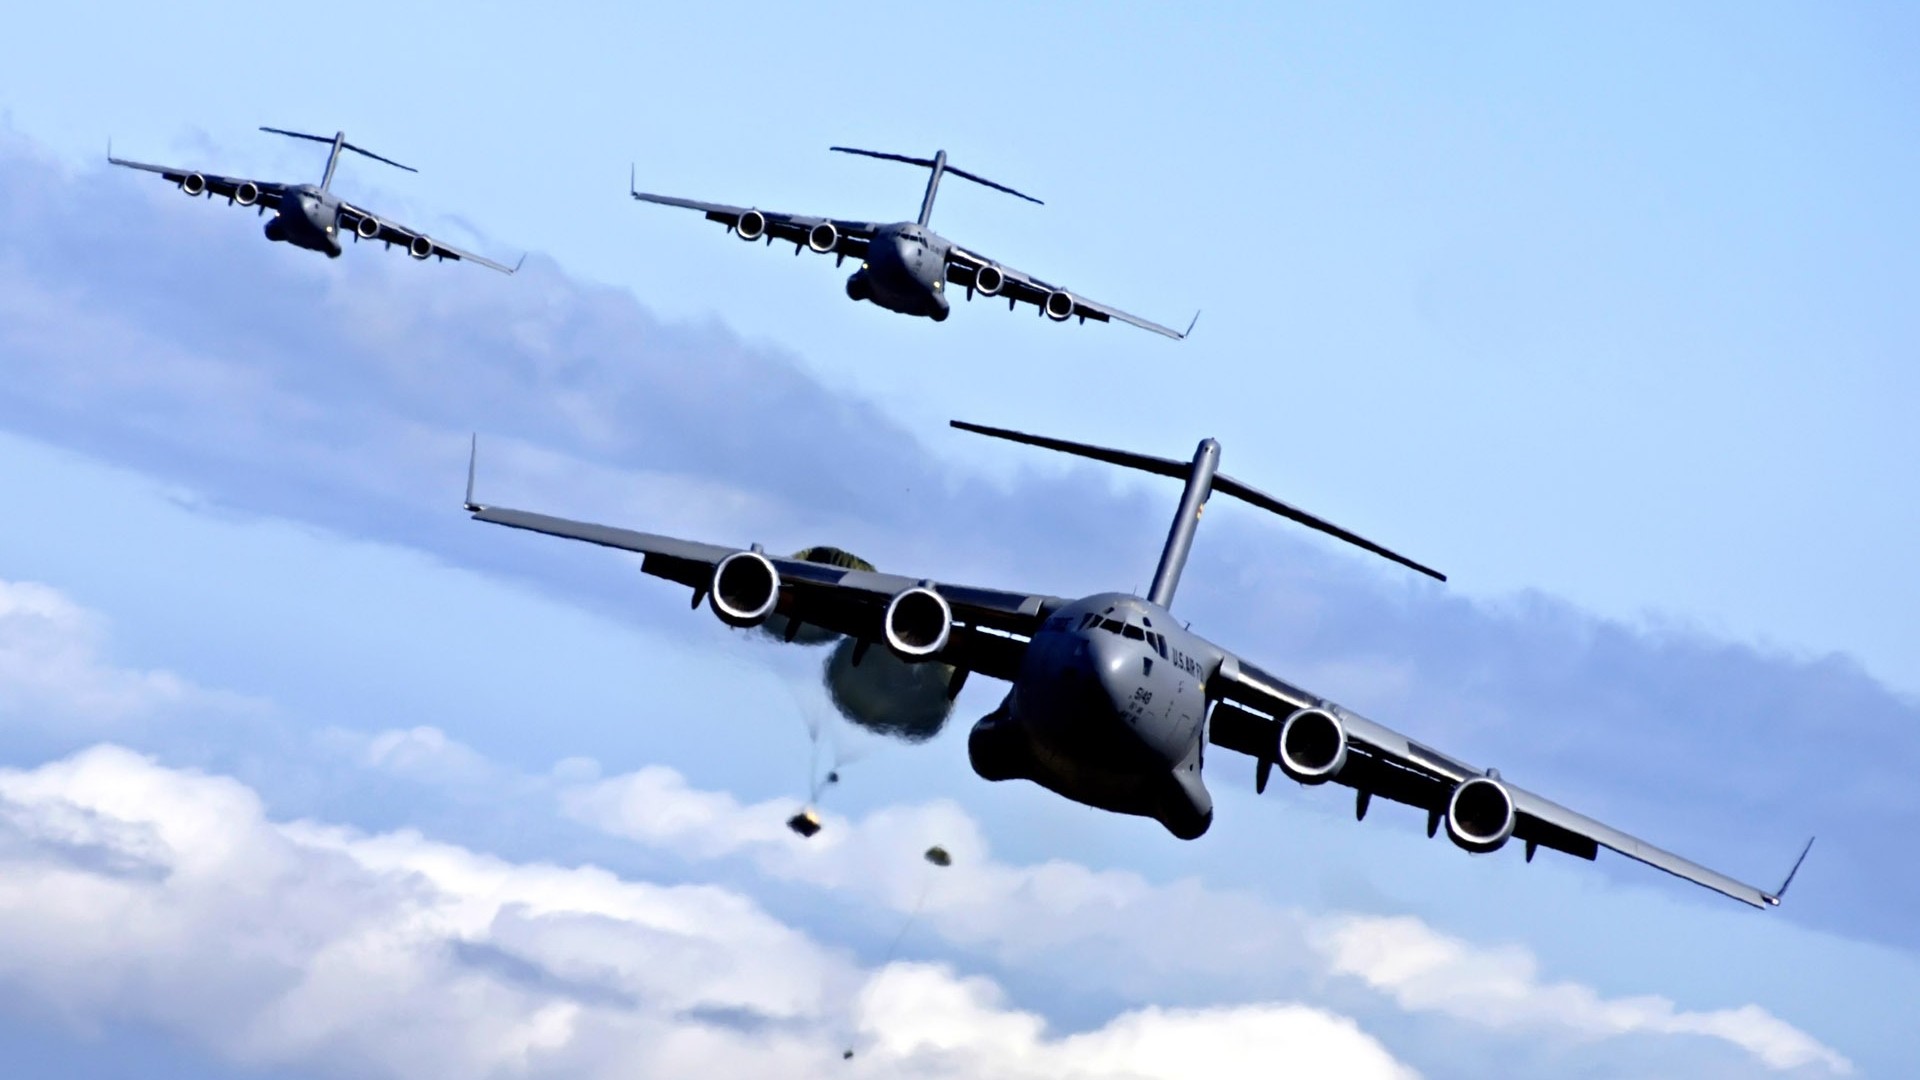 General 1920x1080 military aircraft airplane jets sky Boeing C-17 Globemaster III military aircraft frontal view vehicle US Air Force military vehicle